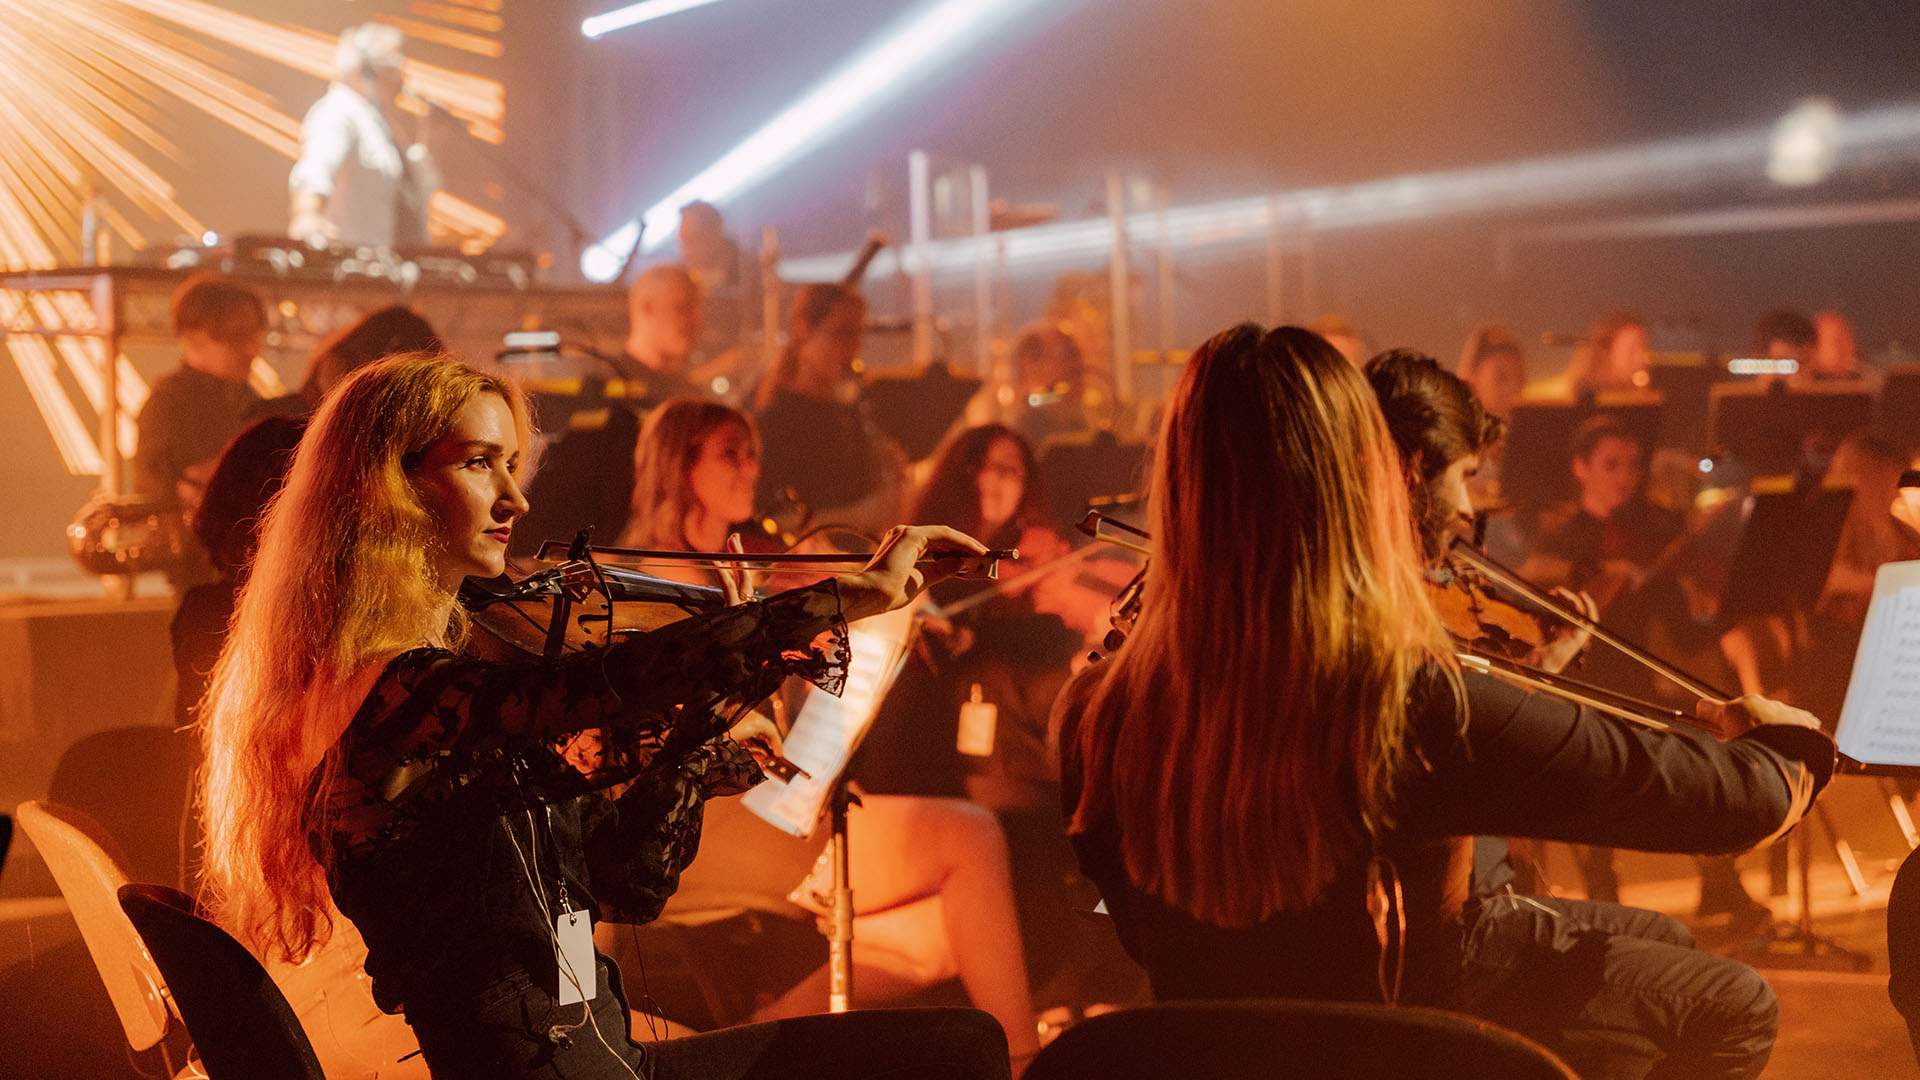 Ministry of Sound Is Hitting Spark Arena with a Massive Orchestra Show Filled with Dance Music